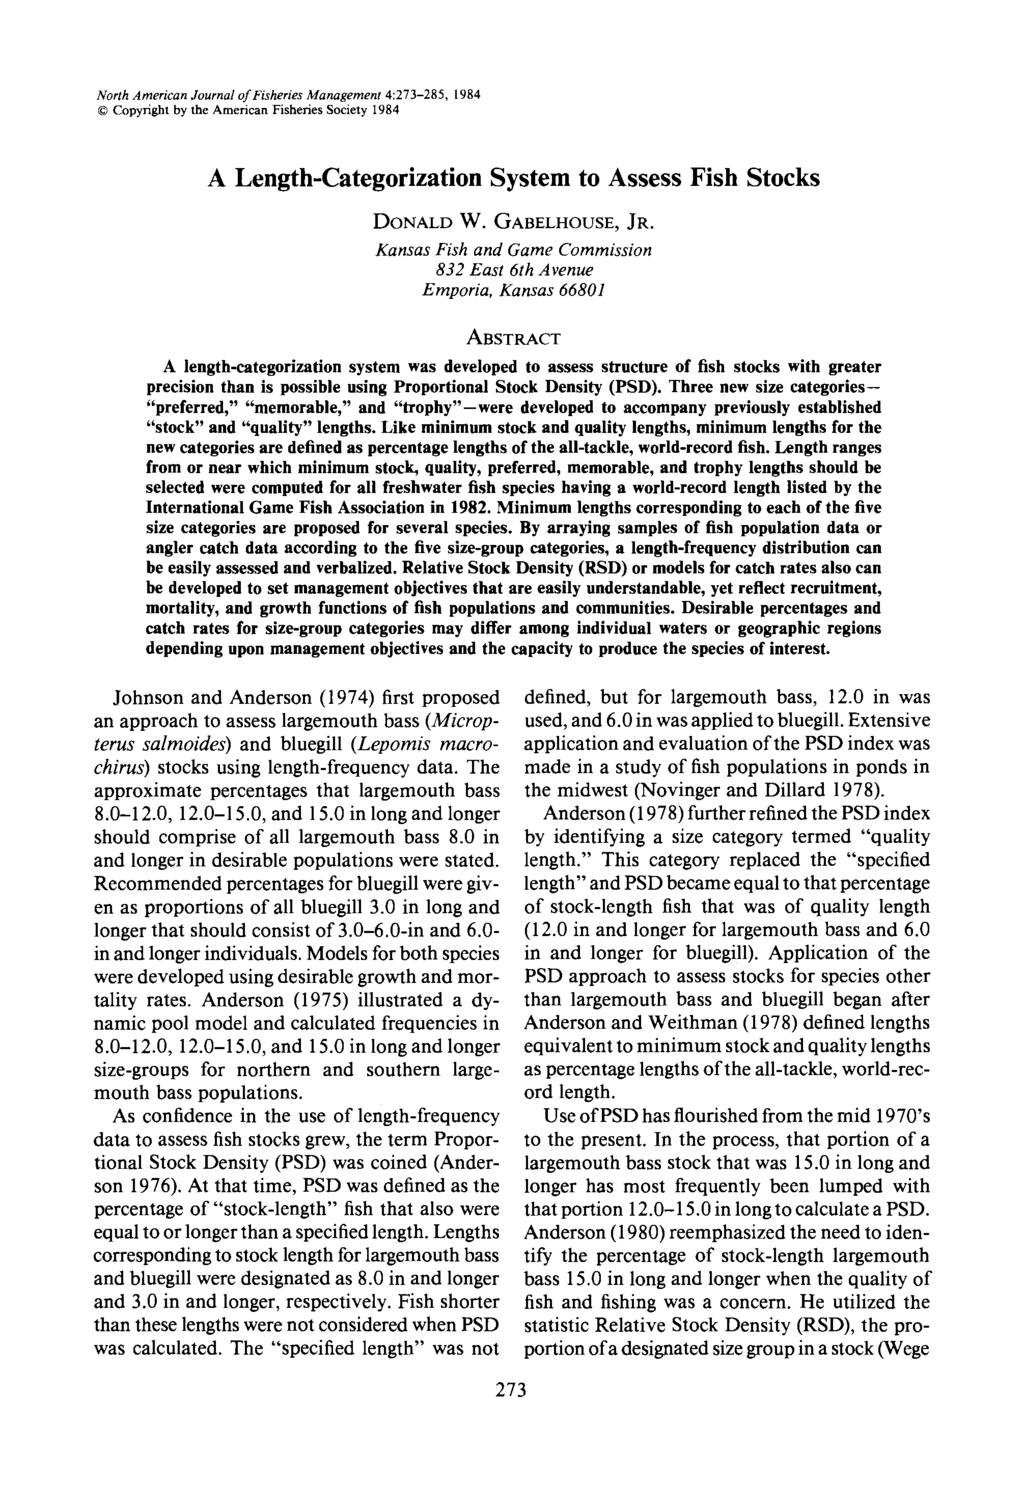 North American Journal of Fisheries Management 4:273-285, 1984 Copyright by the American Fisheries Society 1984 A Length-Categorization System to Assess Fish Stocks DONALD W. GABELHOUSE, JR.